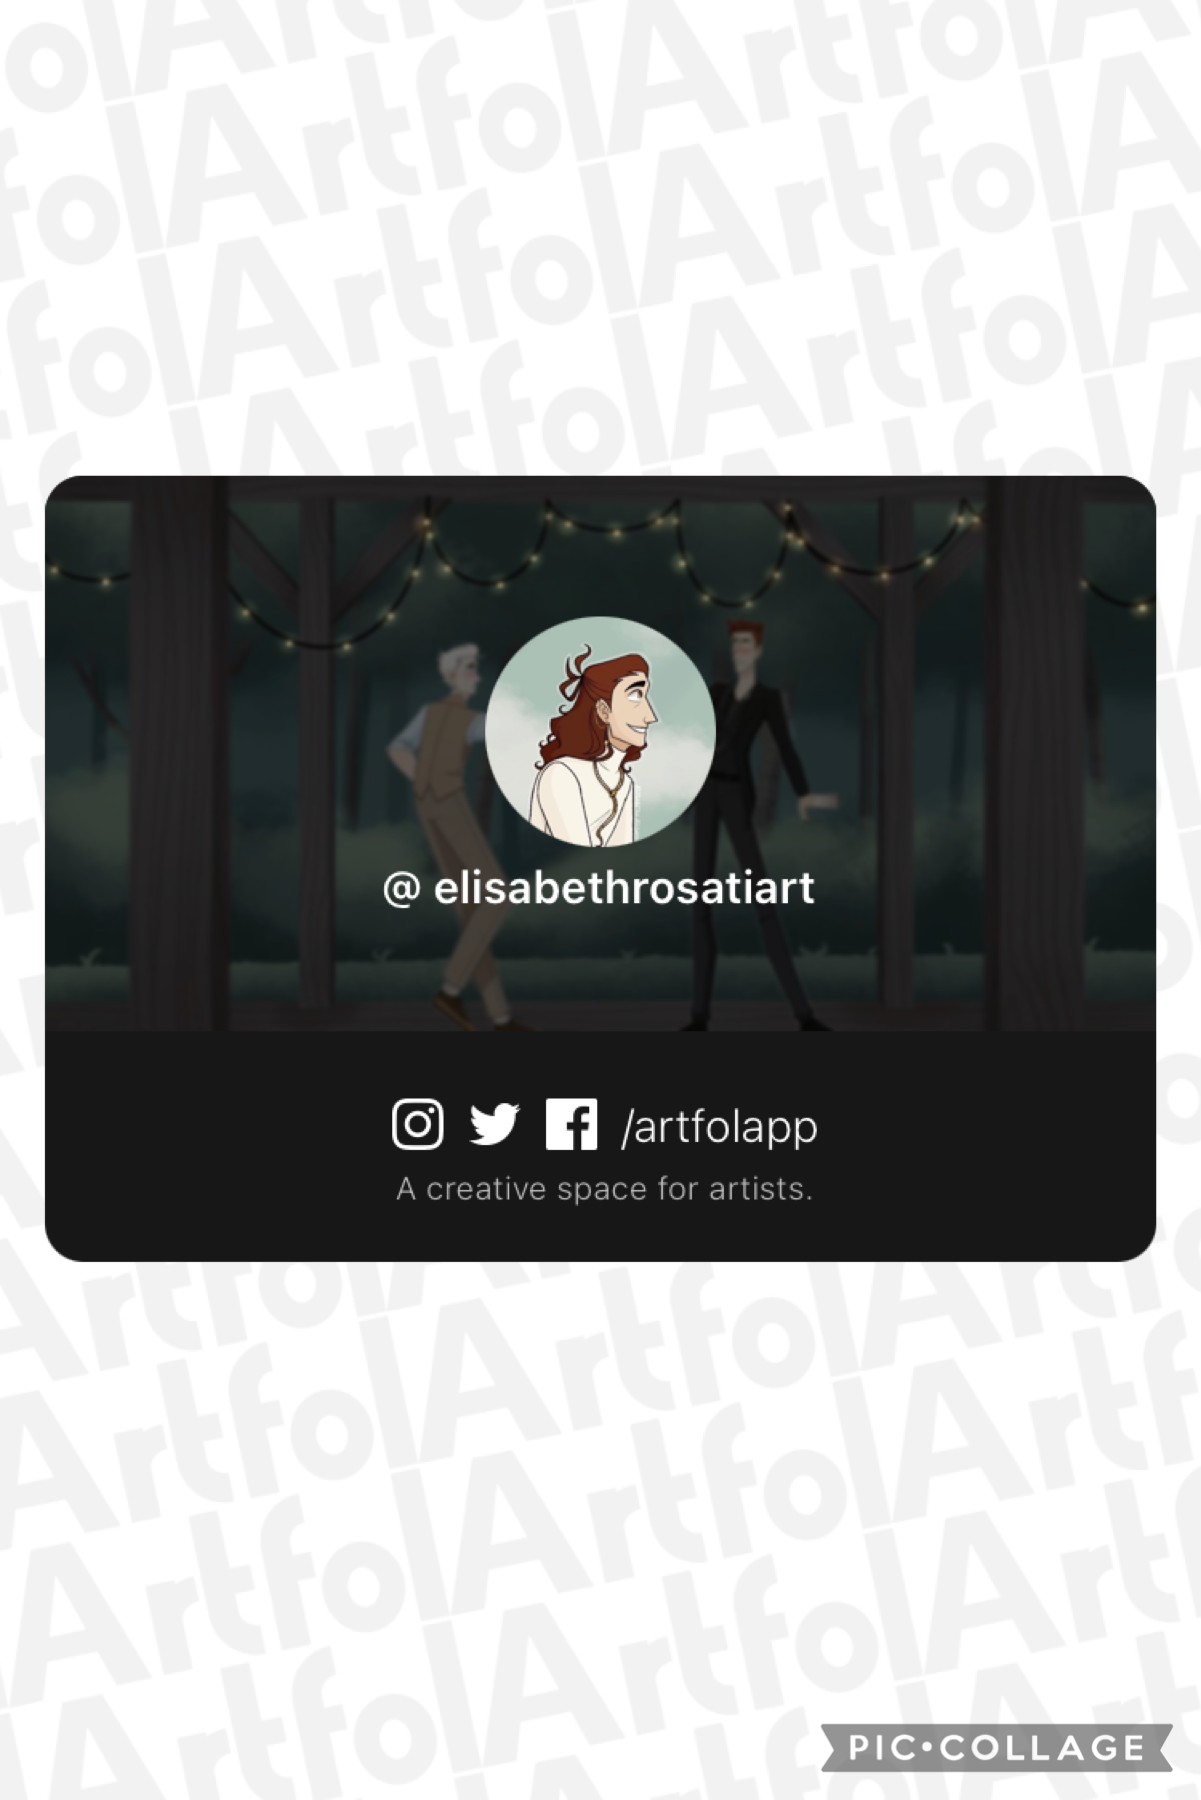 artfol officially released to the public yesterday so if you have it, maybe go follow me. if you’re an artist and you don’t have it, you should absolutely get it, it’s a great place to share your art.